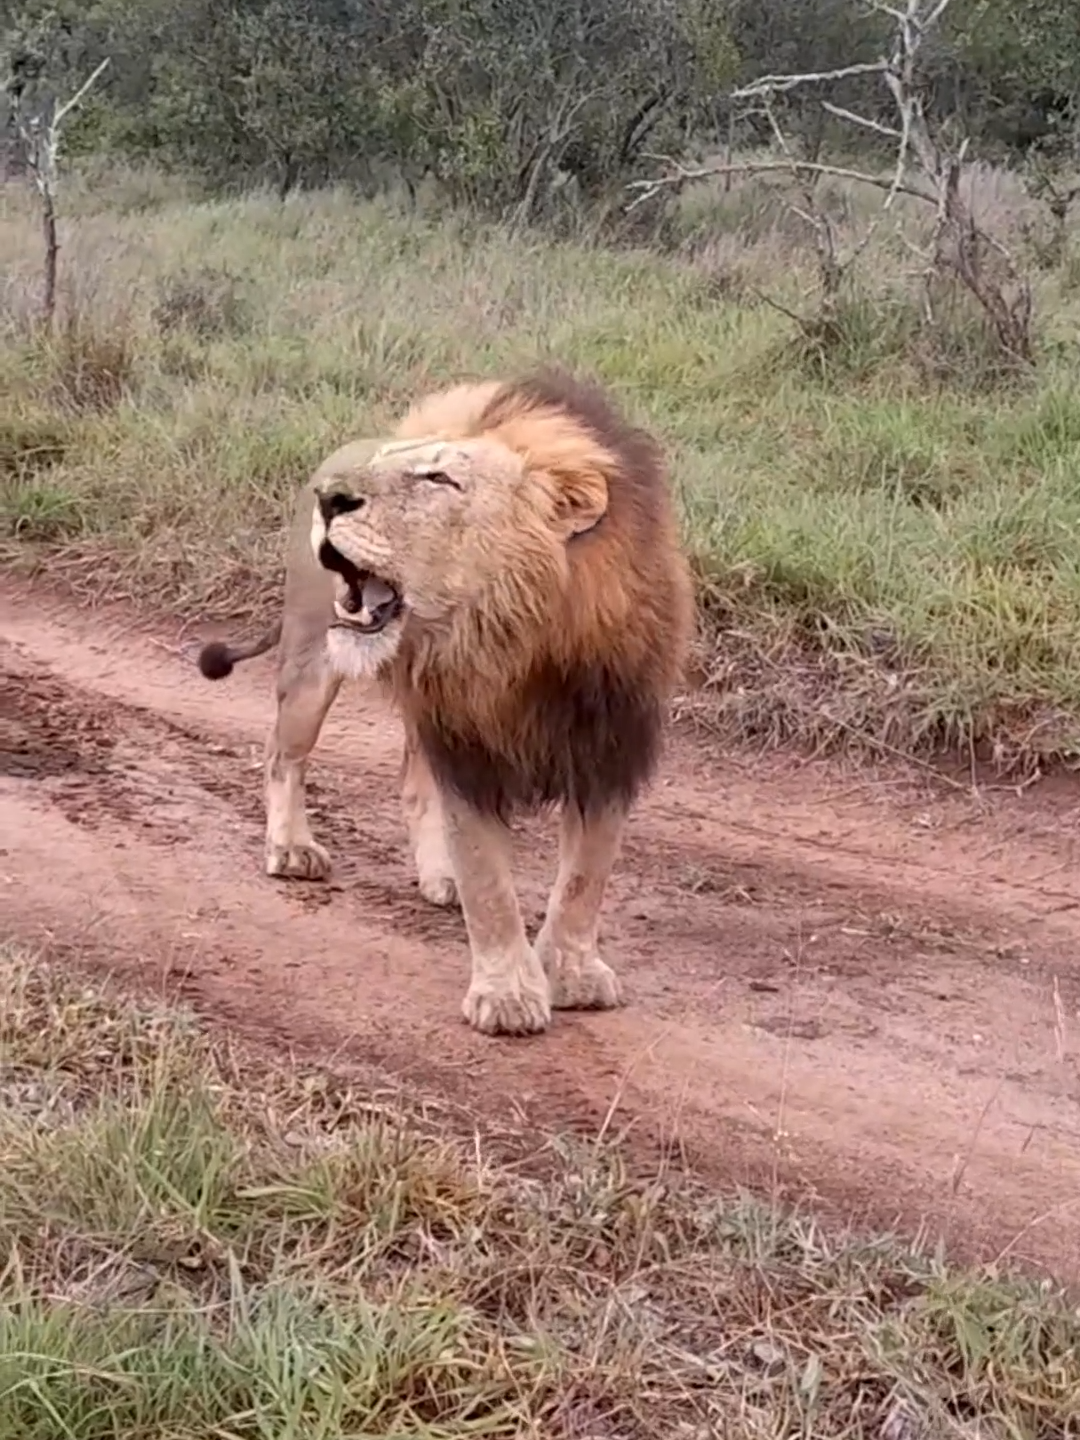 Volume up! 🔊  An incredible encounter with a male lion as he casually walked past one of our vehicles, his powerful roar leaving everyone in awe. 🌿🦁 #malelion #roar #wildlife #safari #bigcats